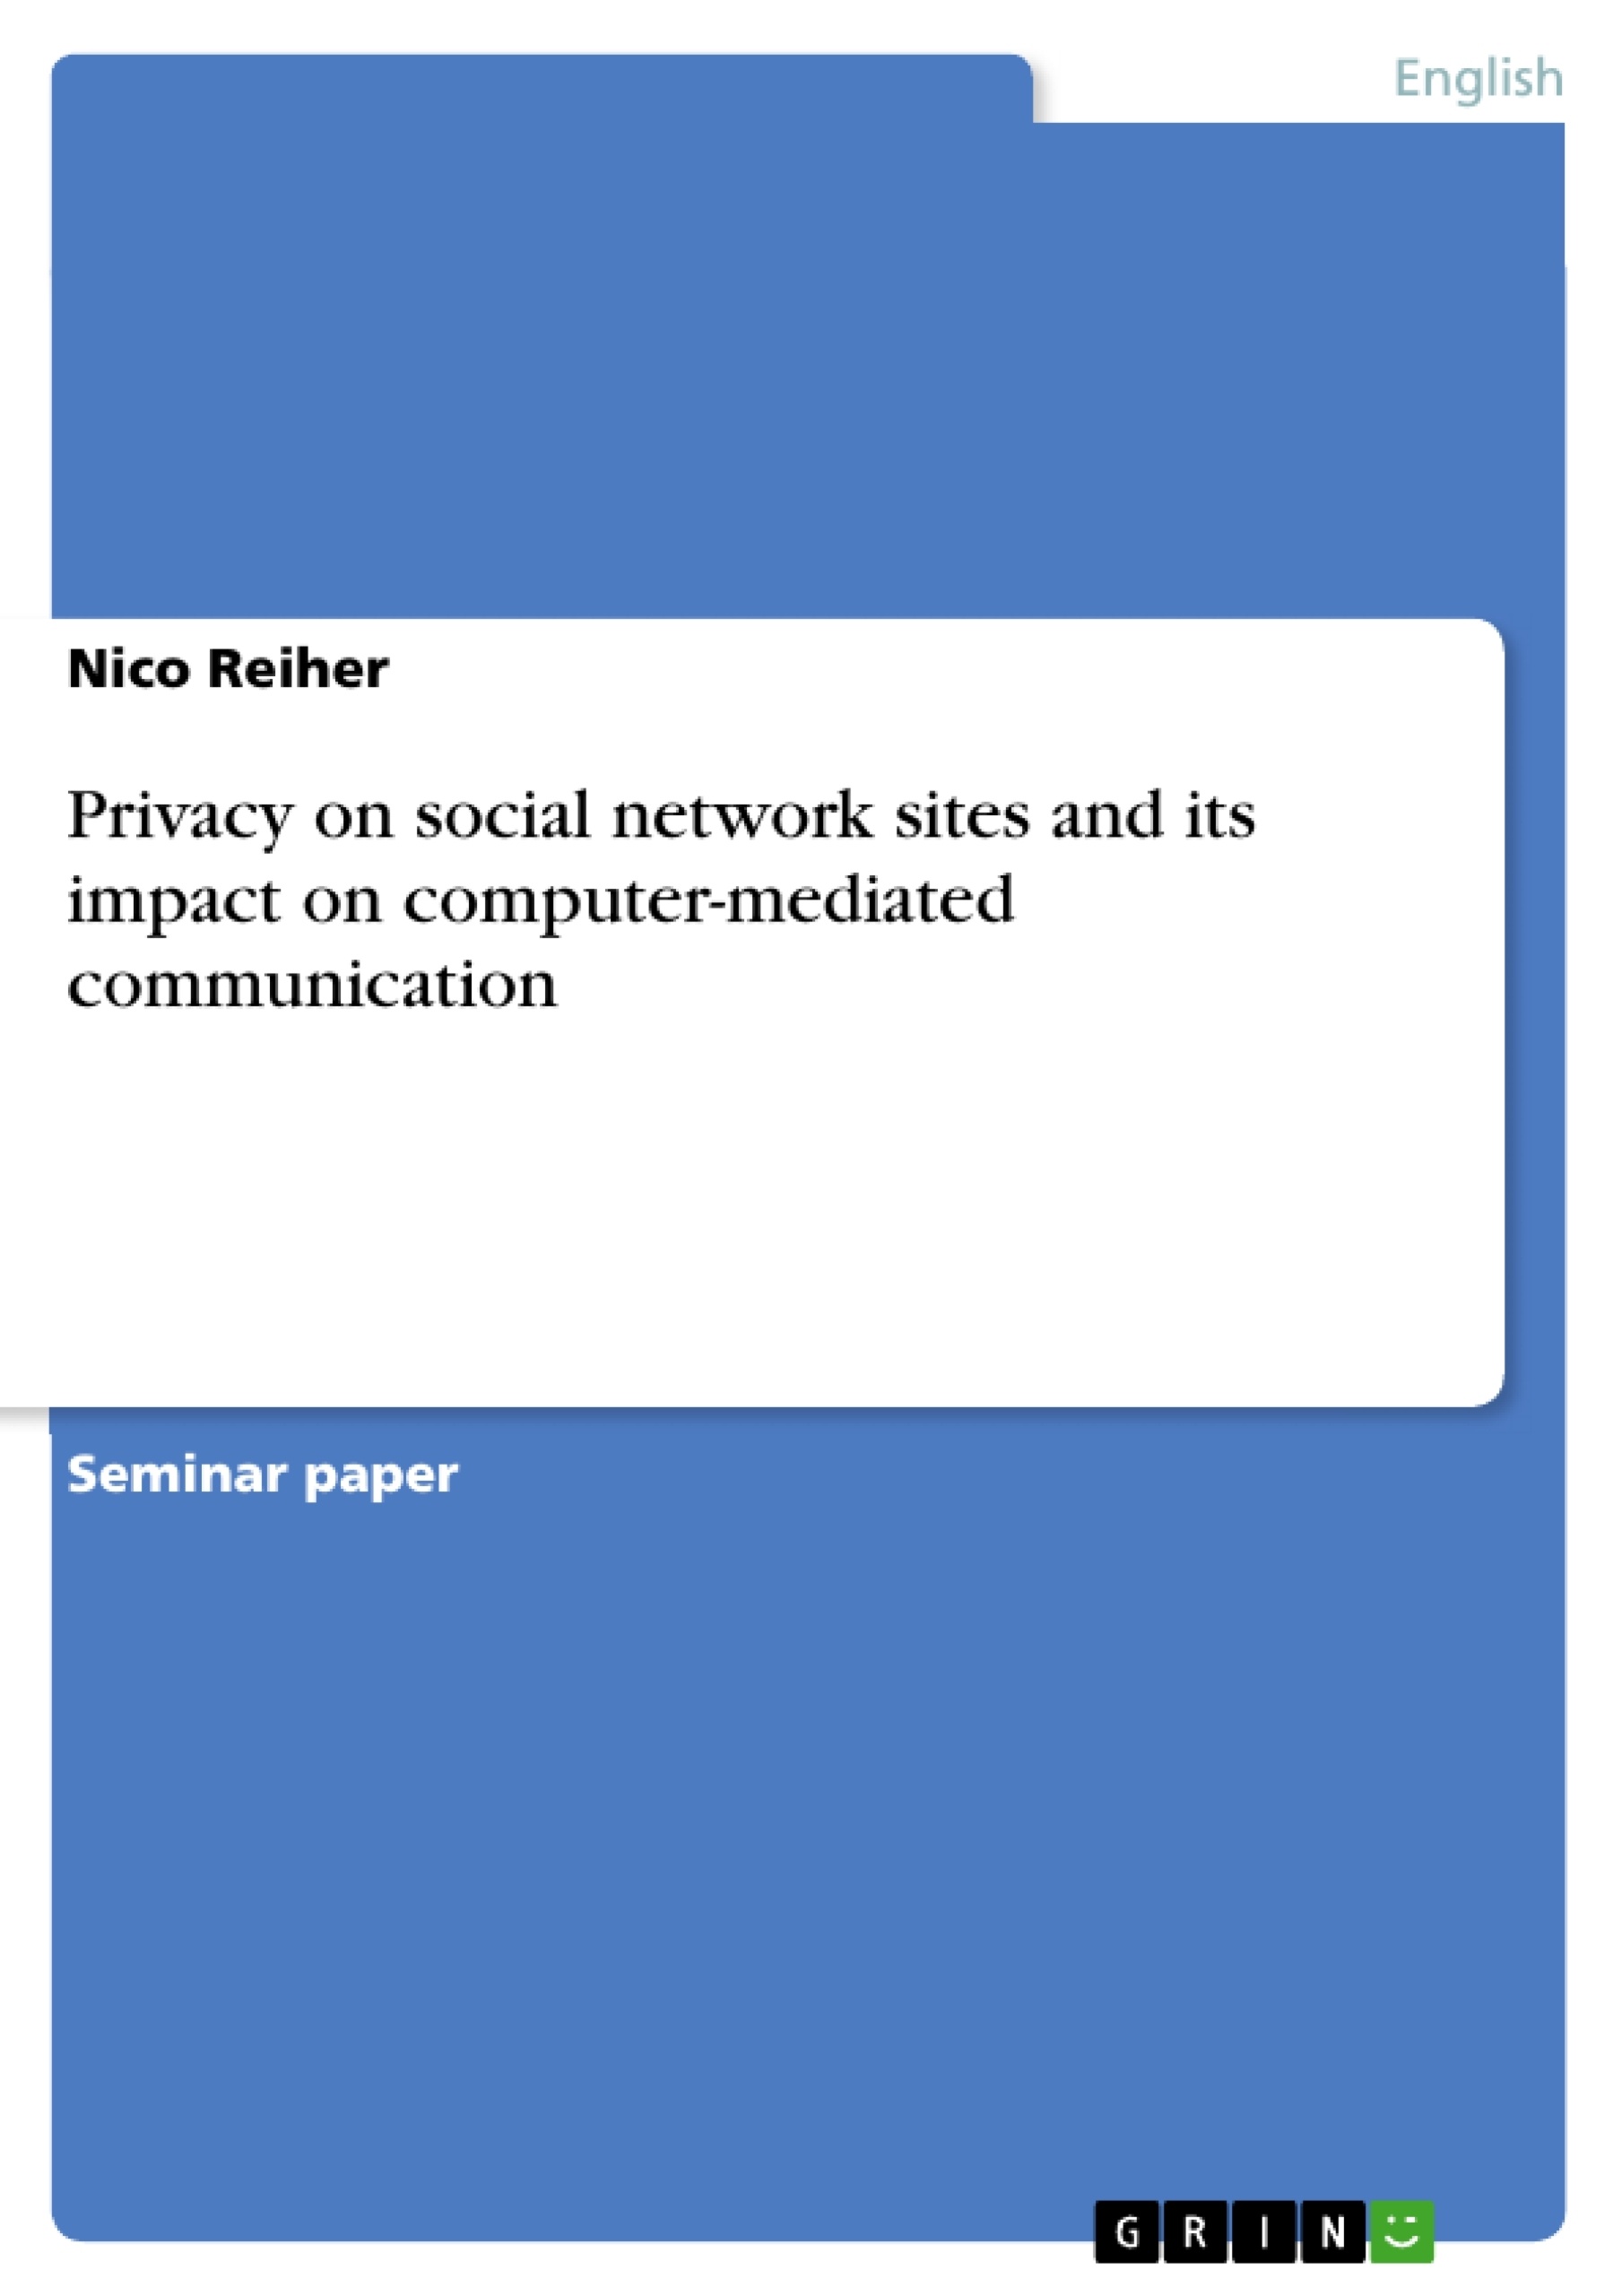 Title: Privacy on social network sites and its impact on computer-mediated communication